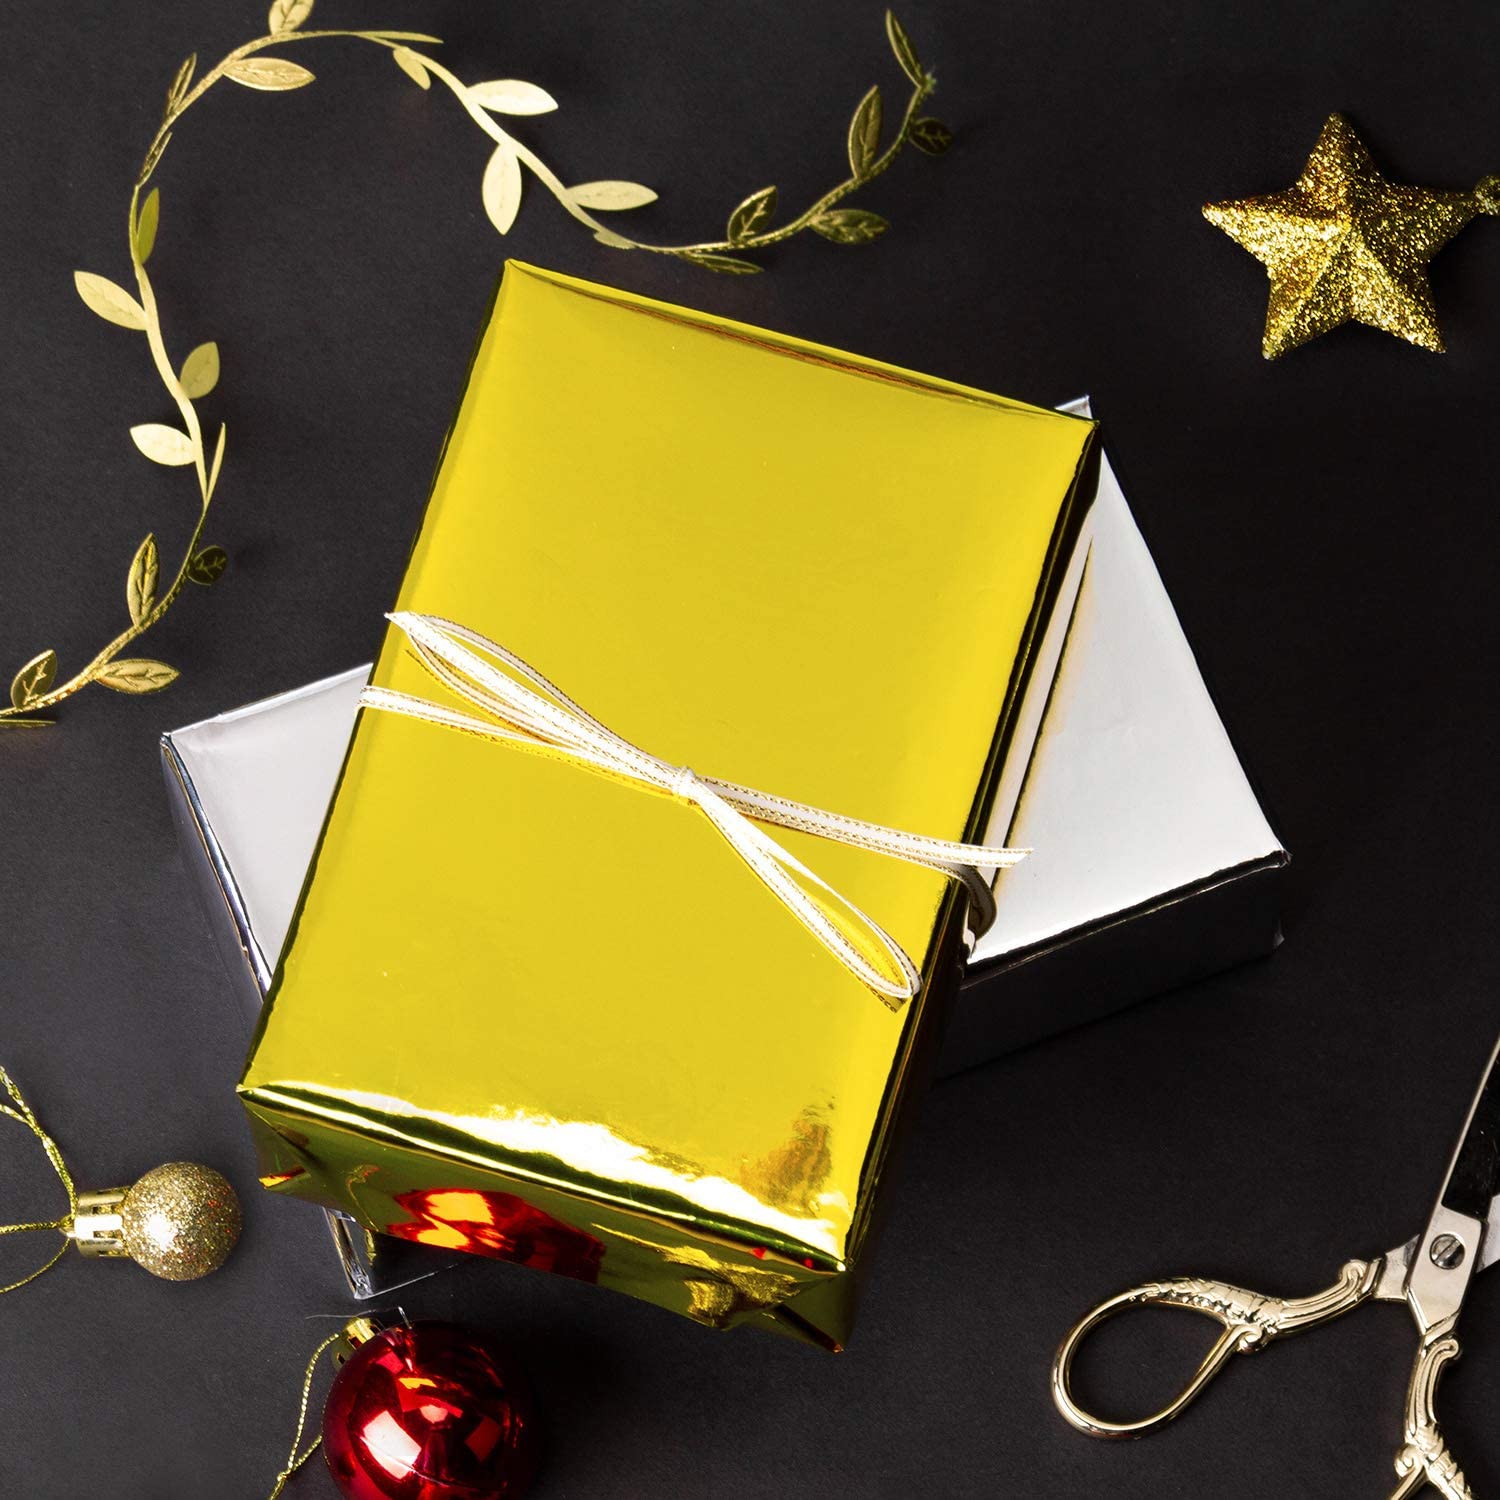  RUSPEPA Golden Metallic Wrapping Paper - Solid Color Matte  Paper Perfect for Wedding, Christmas, Baby Shower - 17.5 Inches X 32.8 Feet  : Health & Household